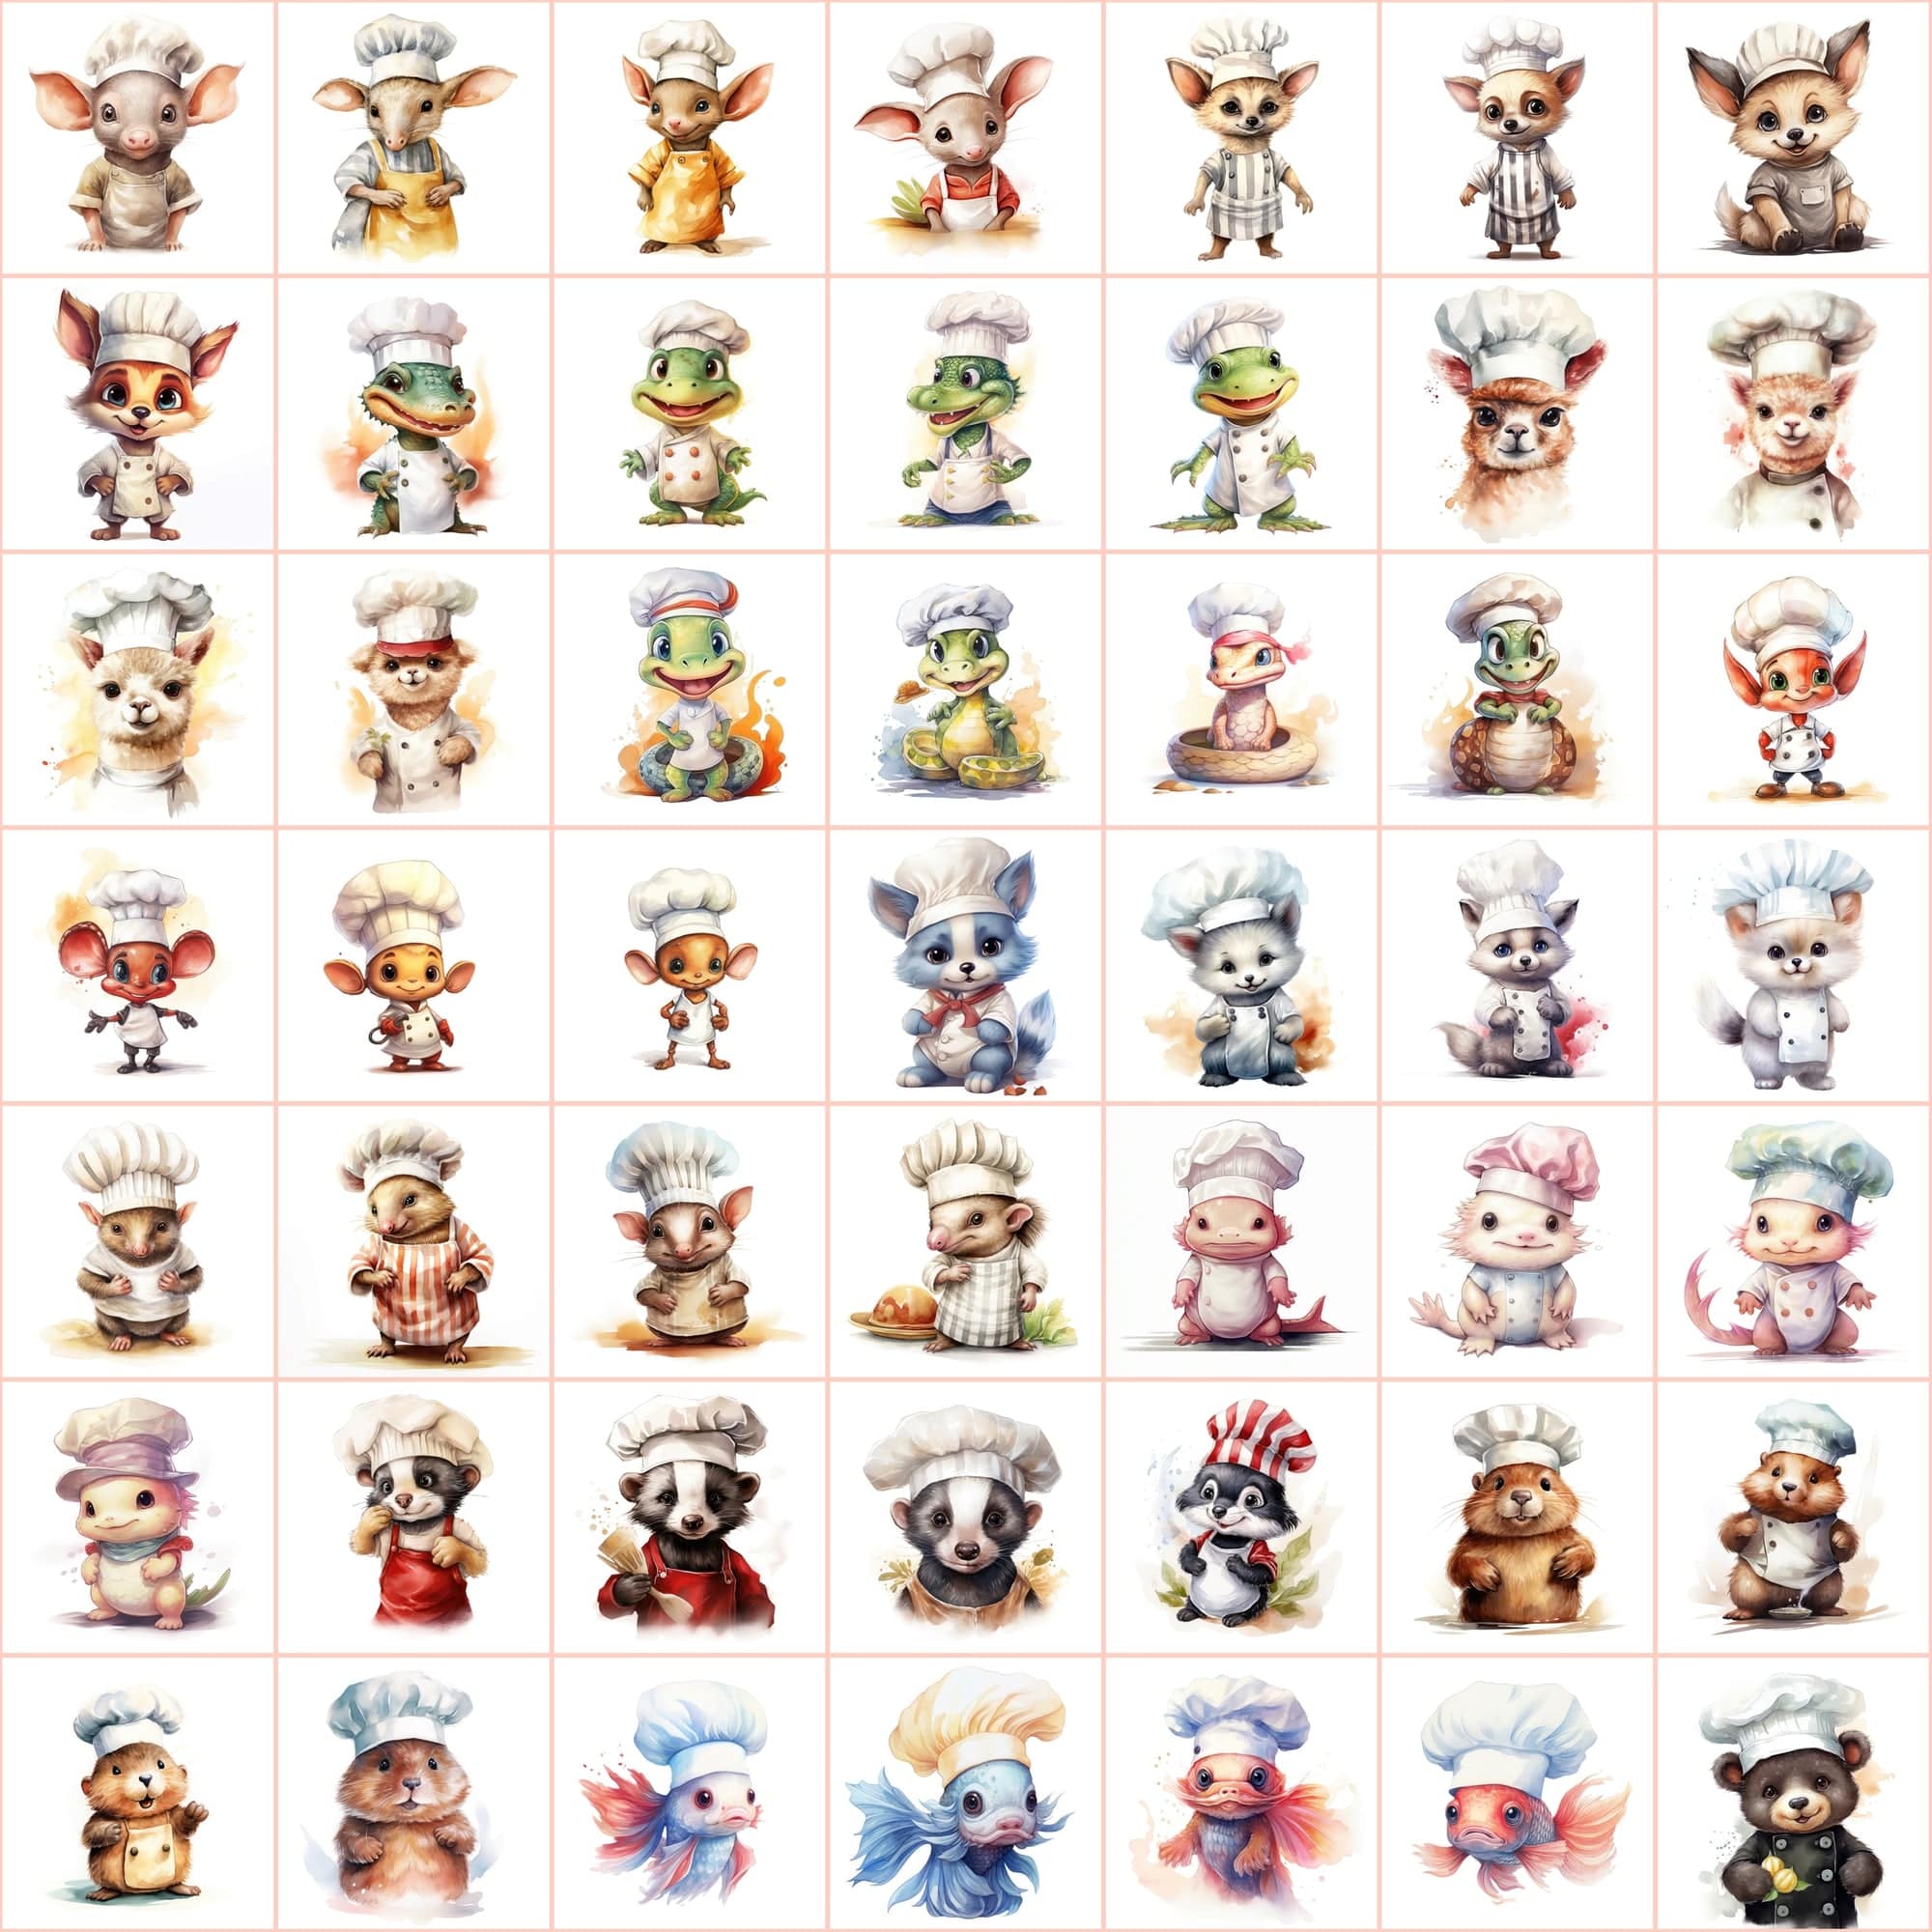 Watercolor Animals with Chef Hats, 590 PNG Images, White & Transparent Backgrounds, Commercial License Included Digital Download Sumobundle